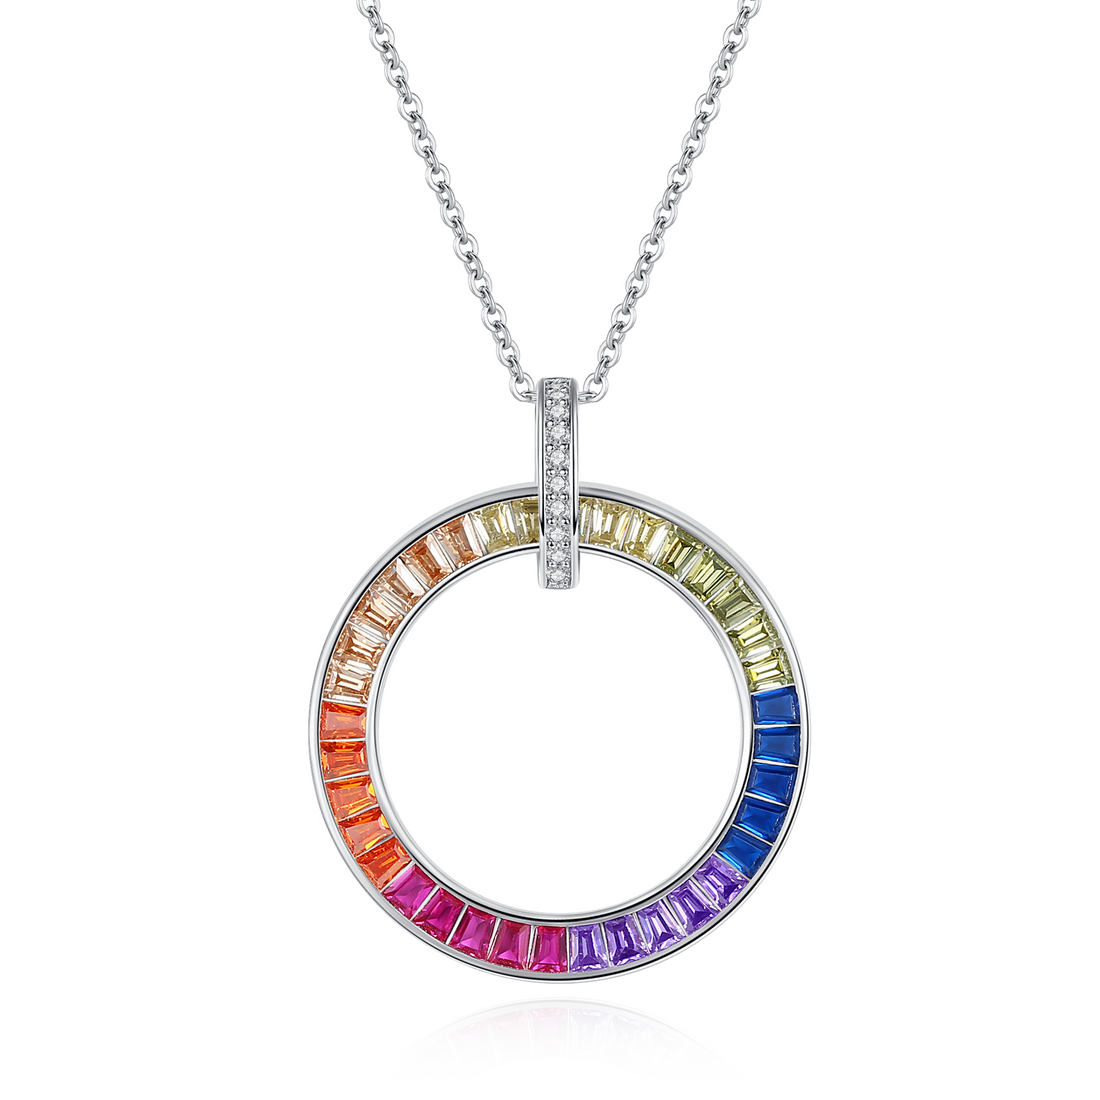 A stunning sparkling circle necklace encrusted with quality cubic zirconia stones in the colour of the rainbow.